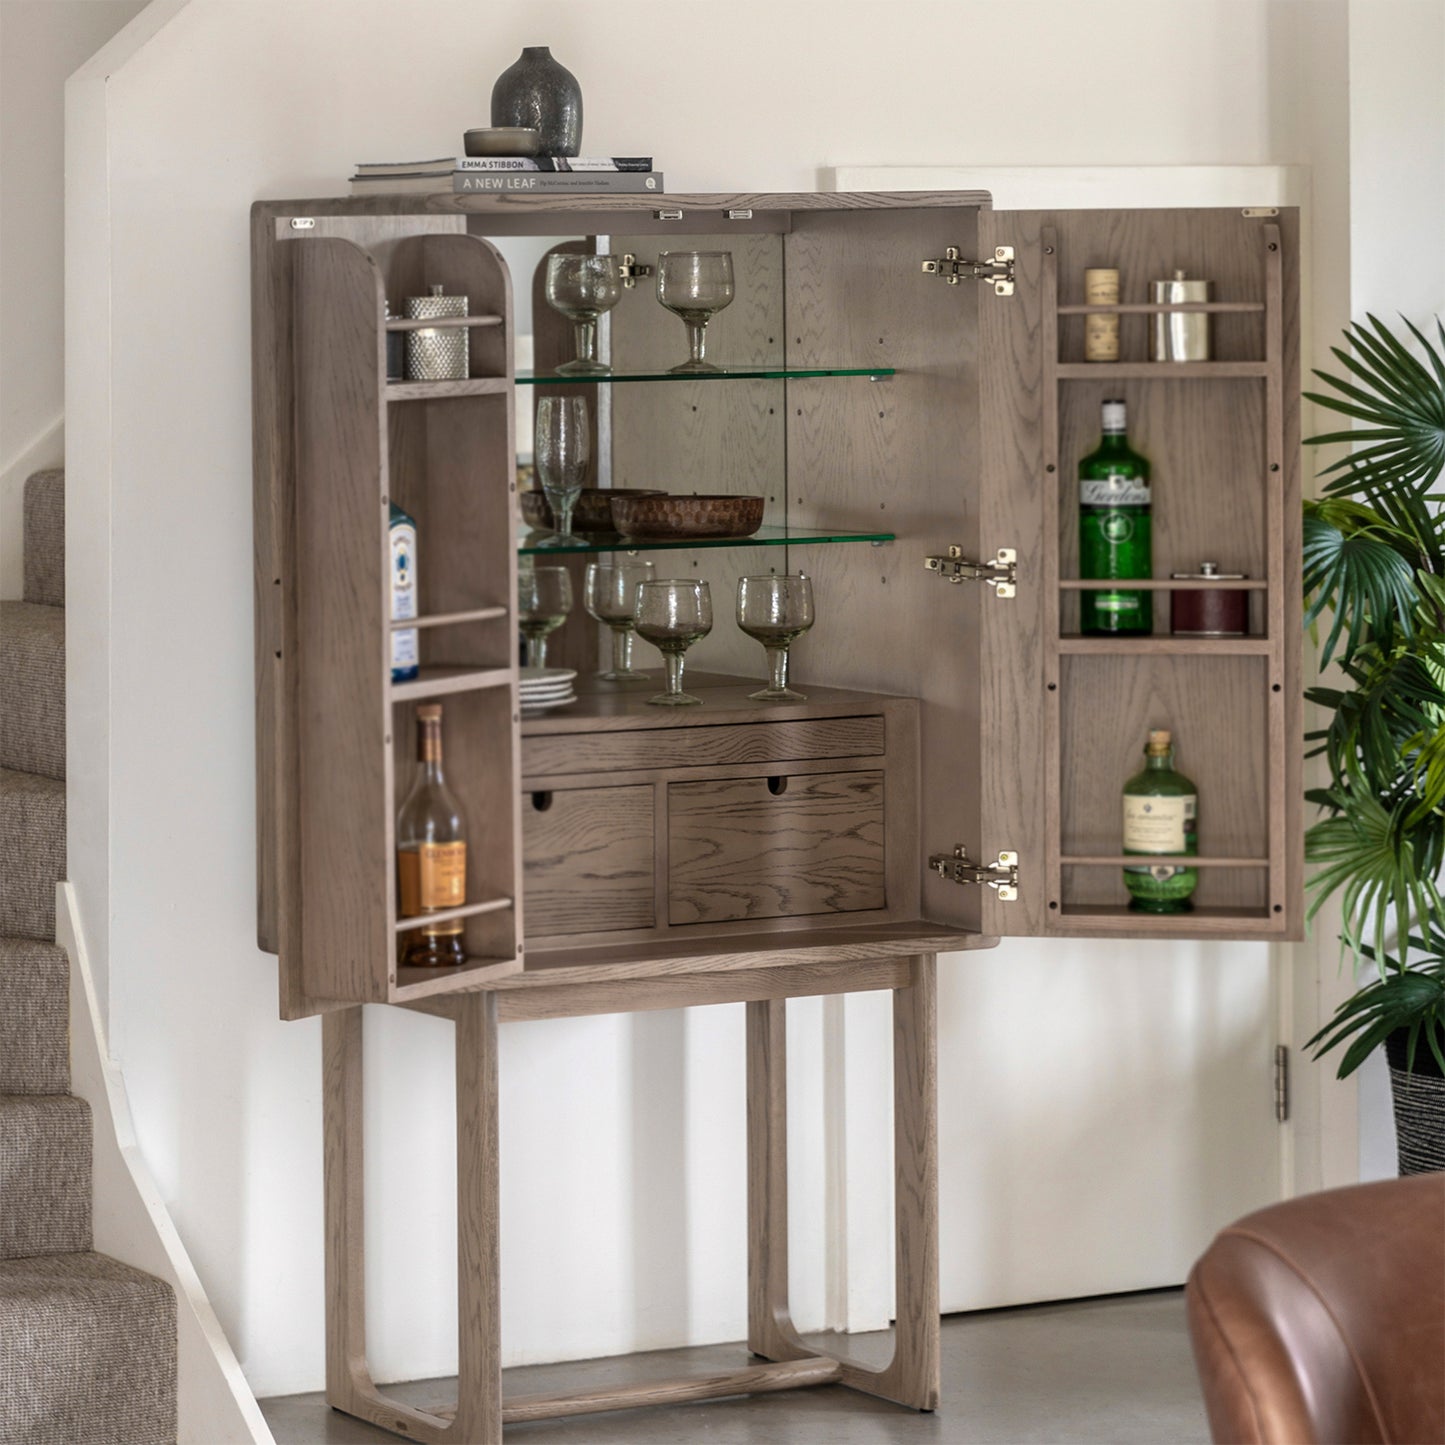 Maurice Cocktail Cabinet:- Smoked